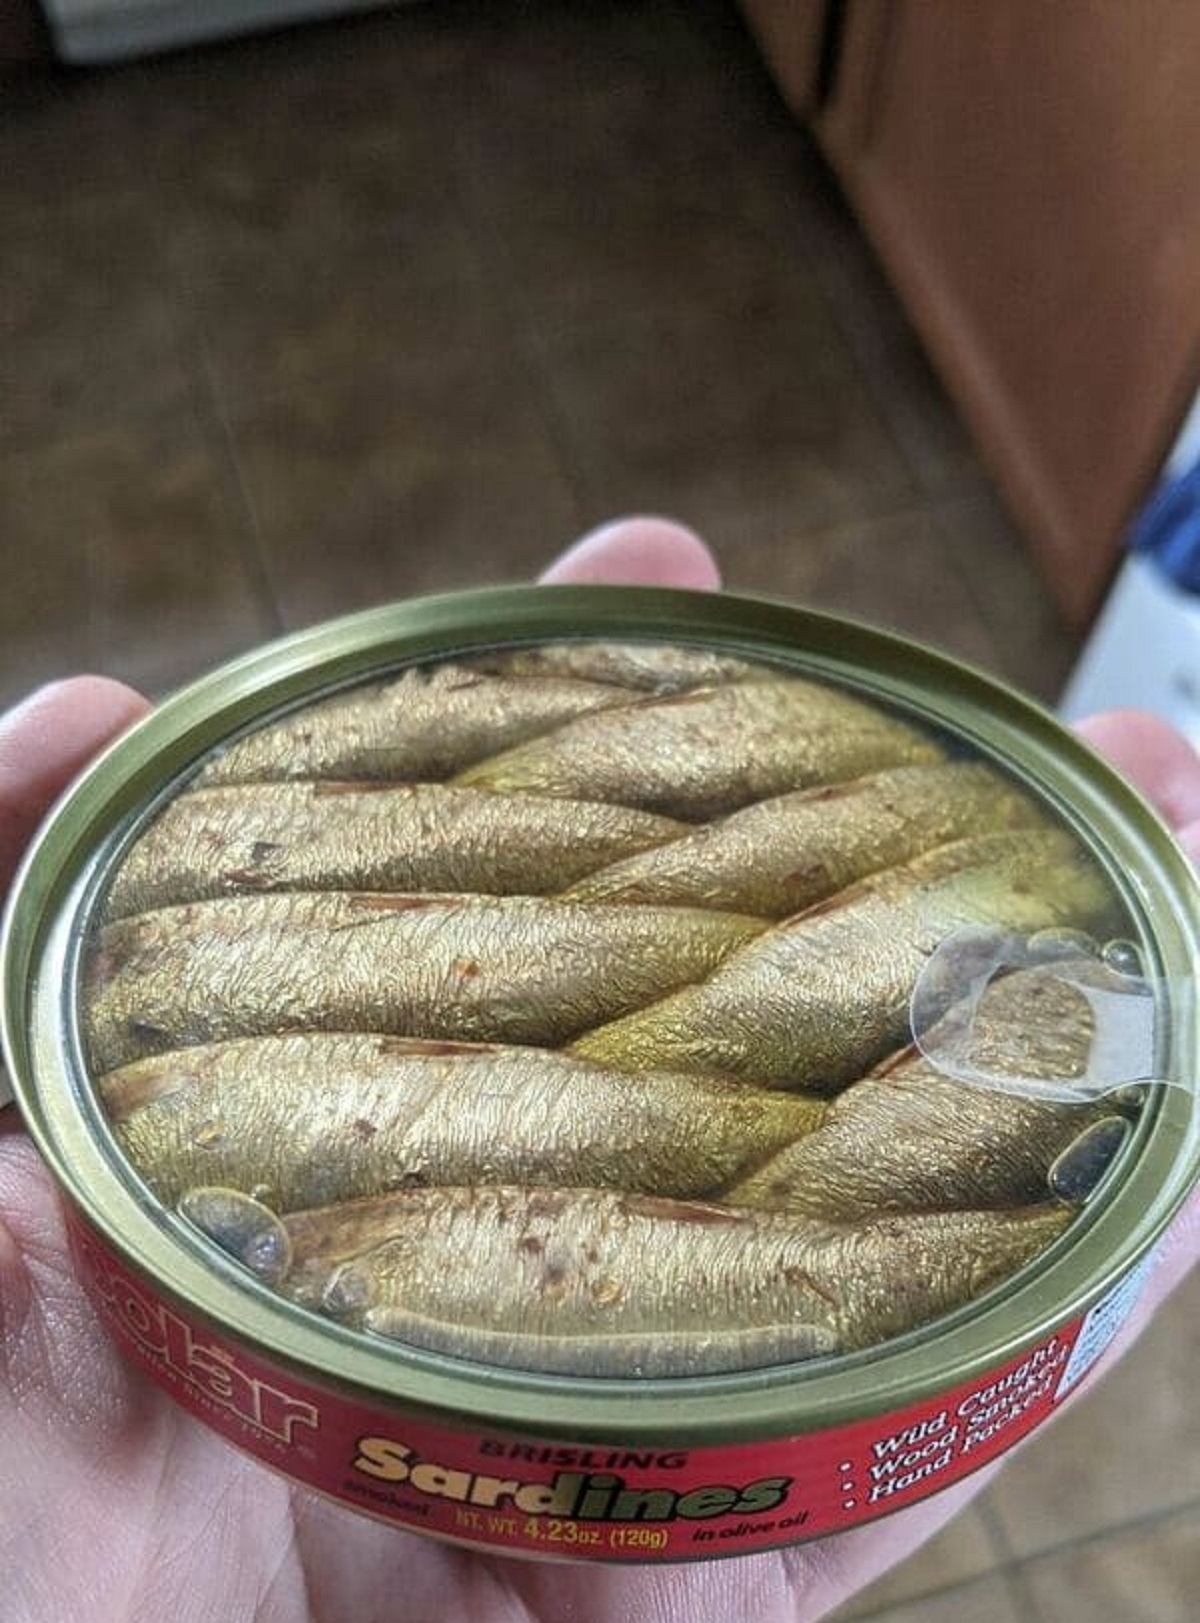 “The Way These Sardines Are Packaged With Transparent Lid”